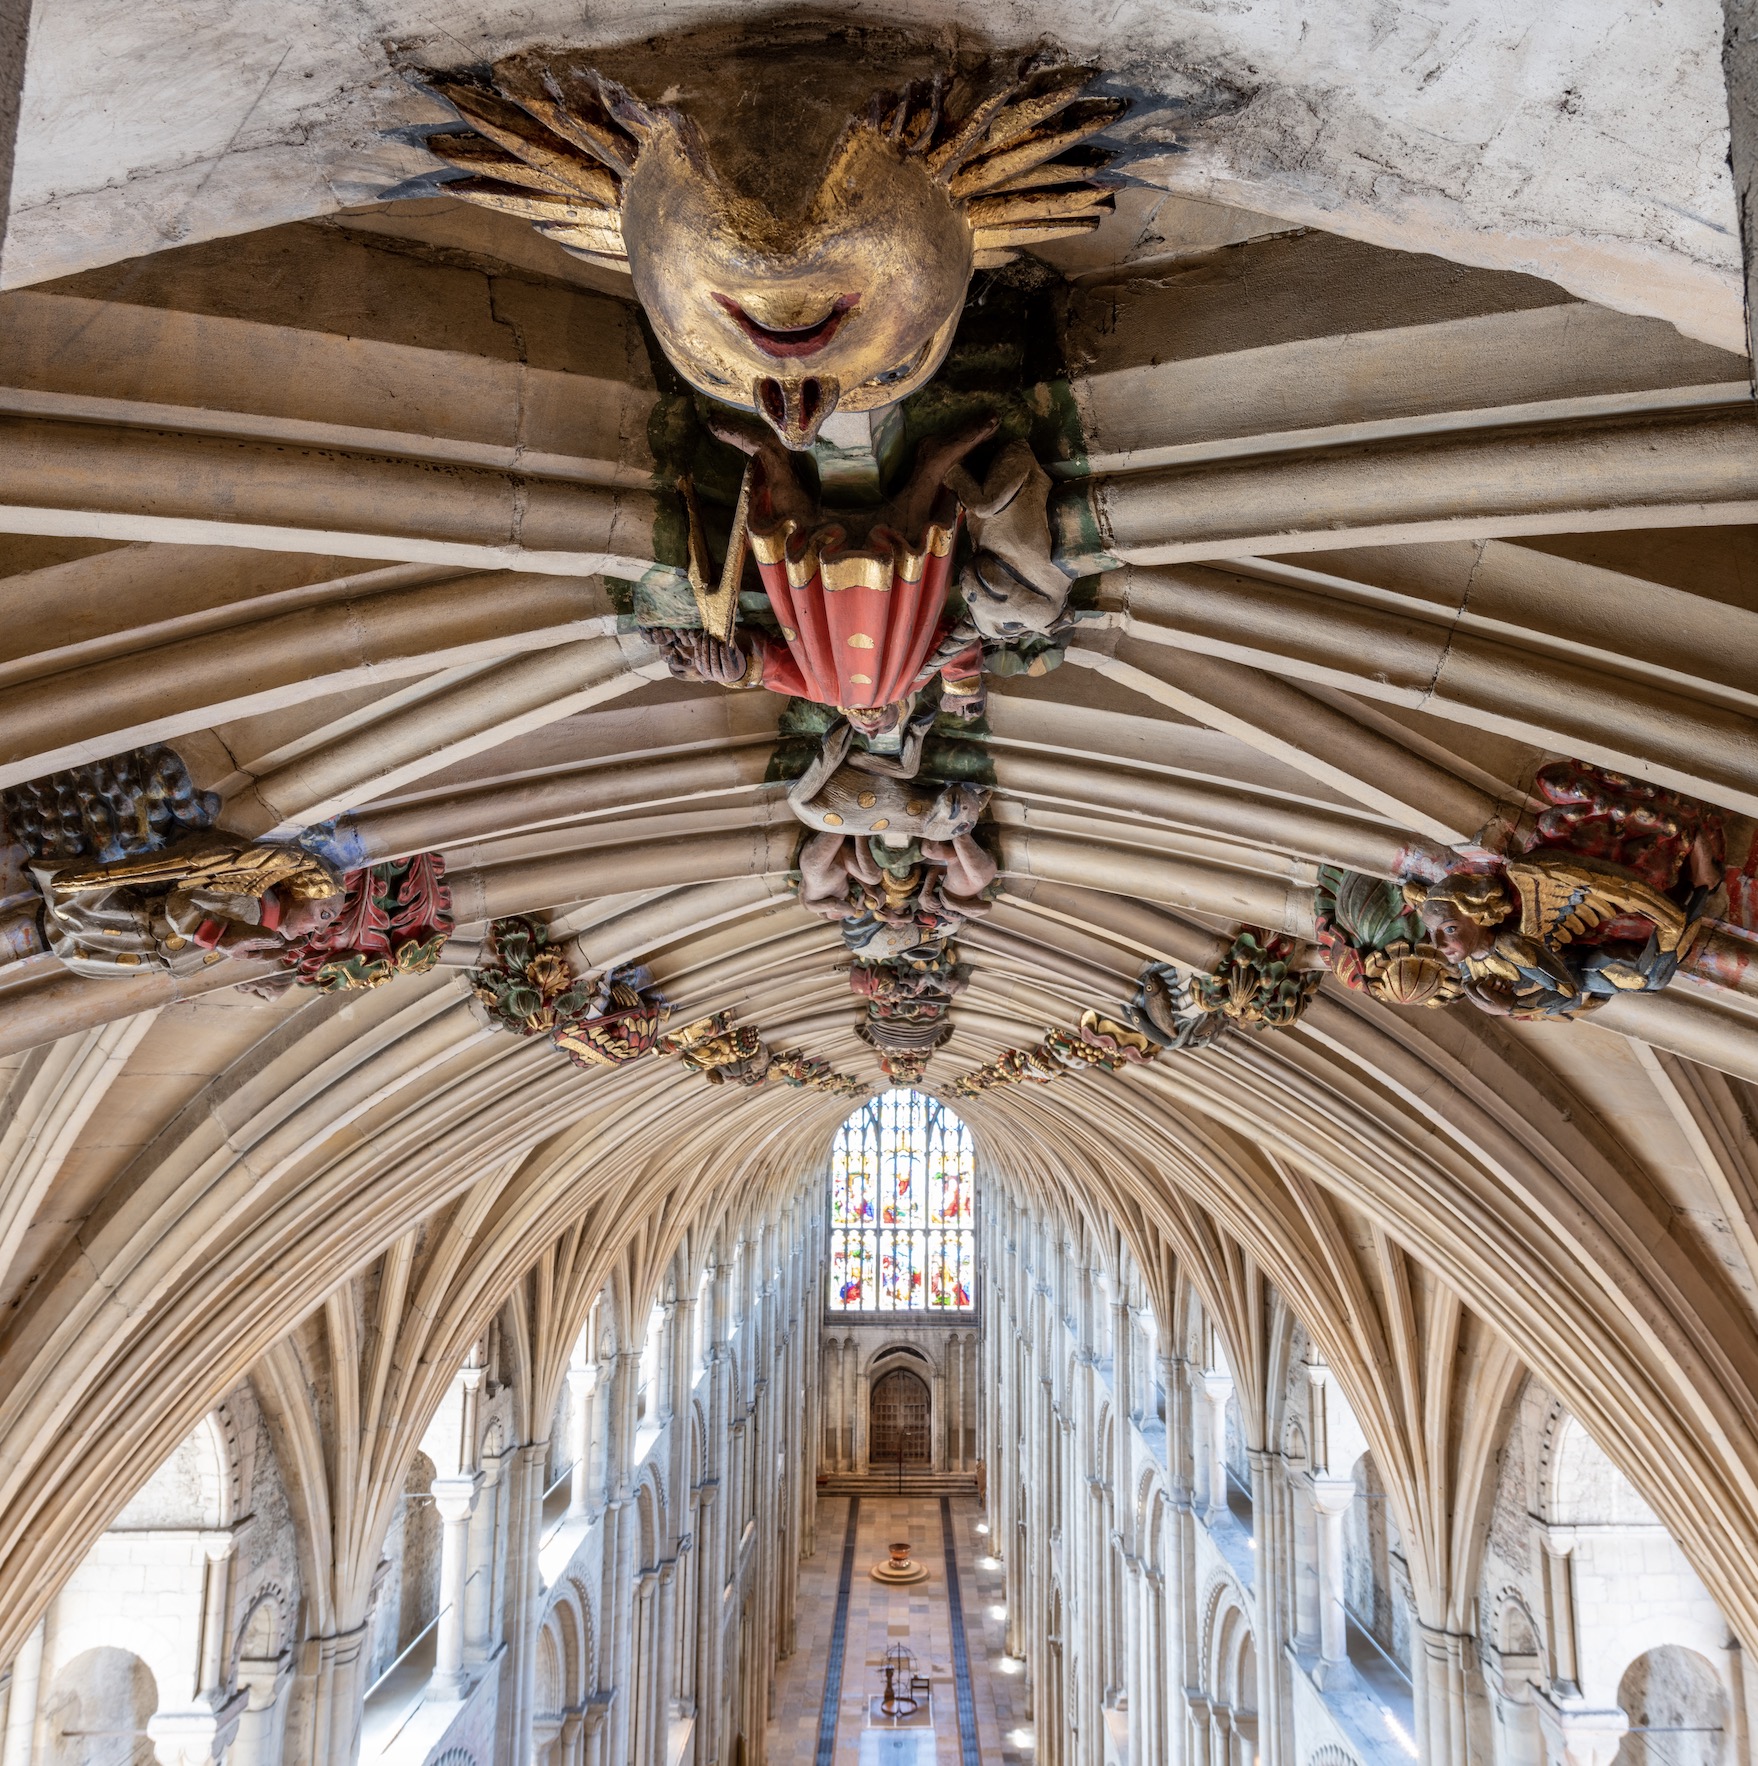 Norwich Cathedral Ceilings - Always Look Up